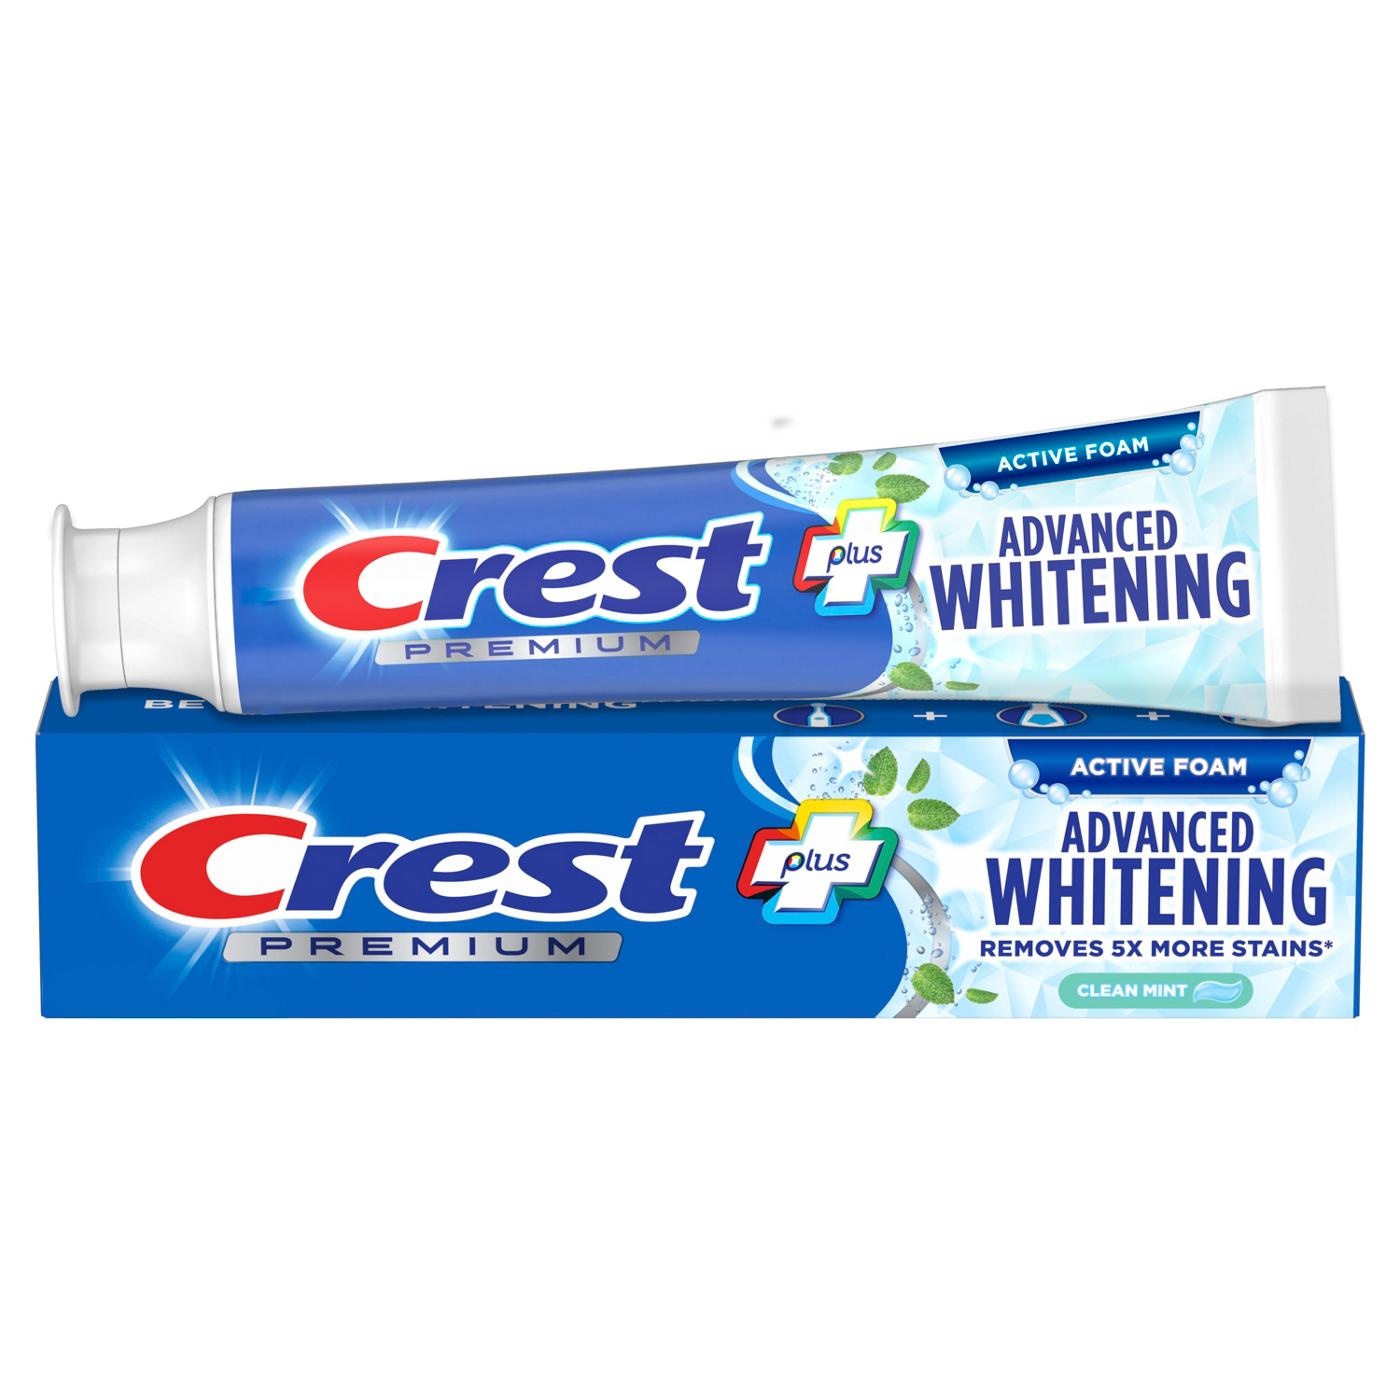 Crest Premium + Advanced Whitening Active Foam Toothpaste - Clean Mint; image 5 of 8